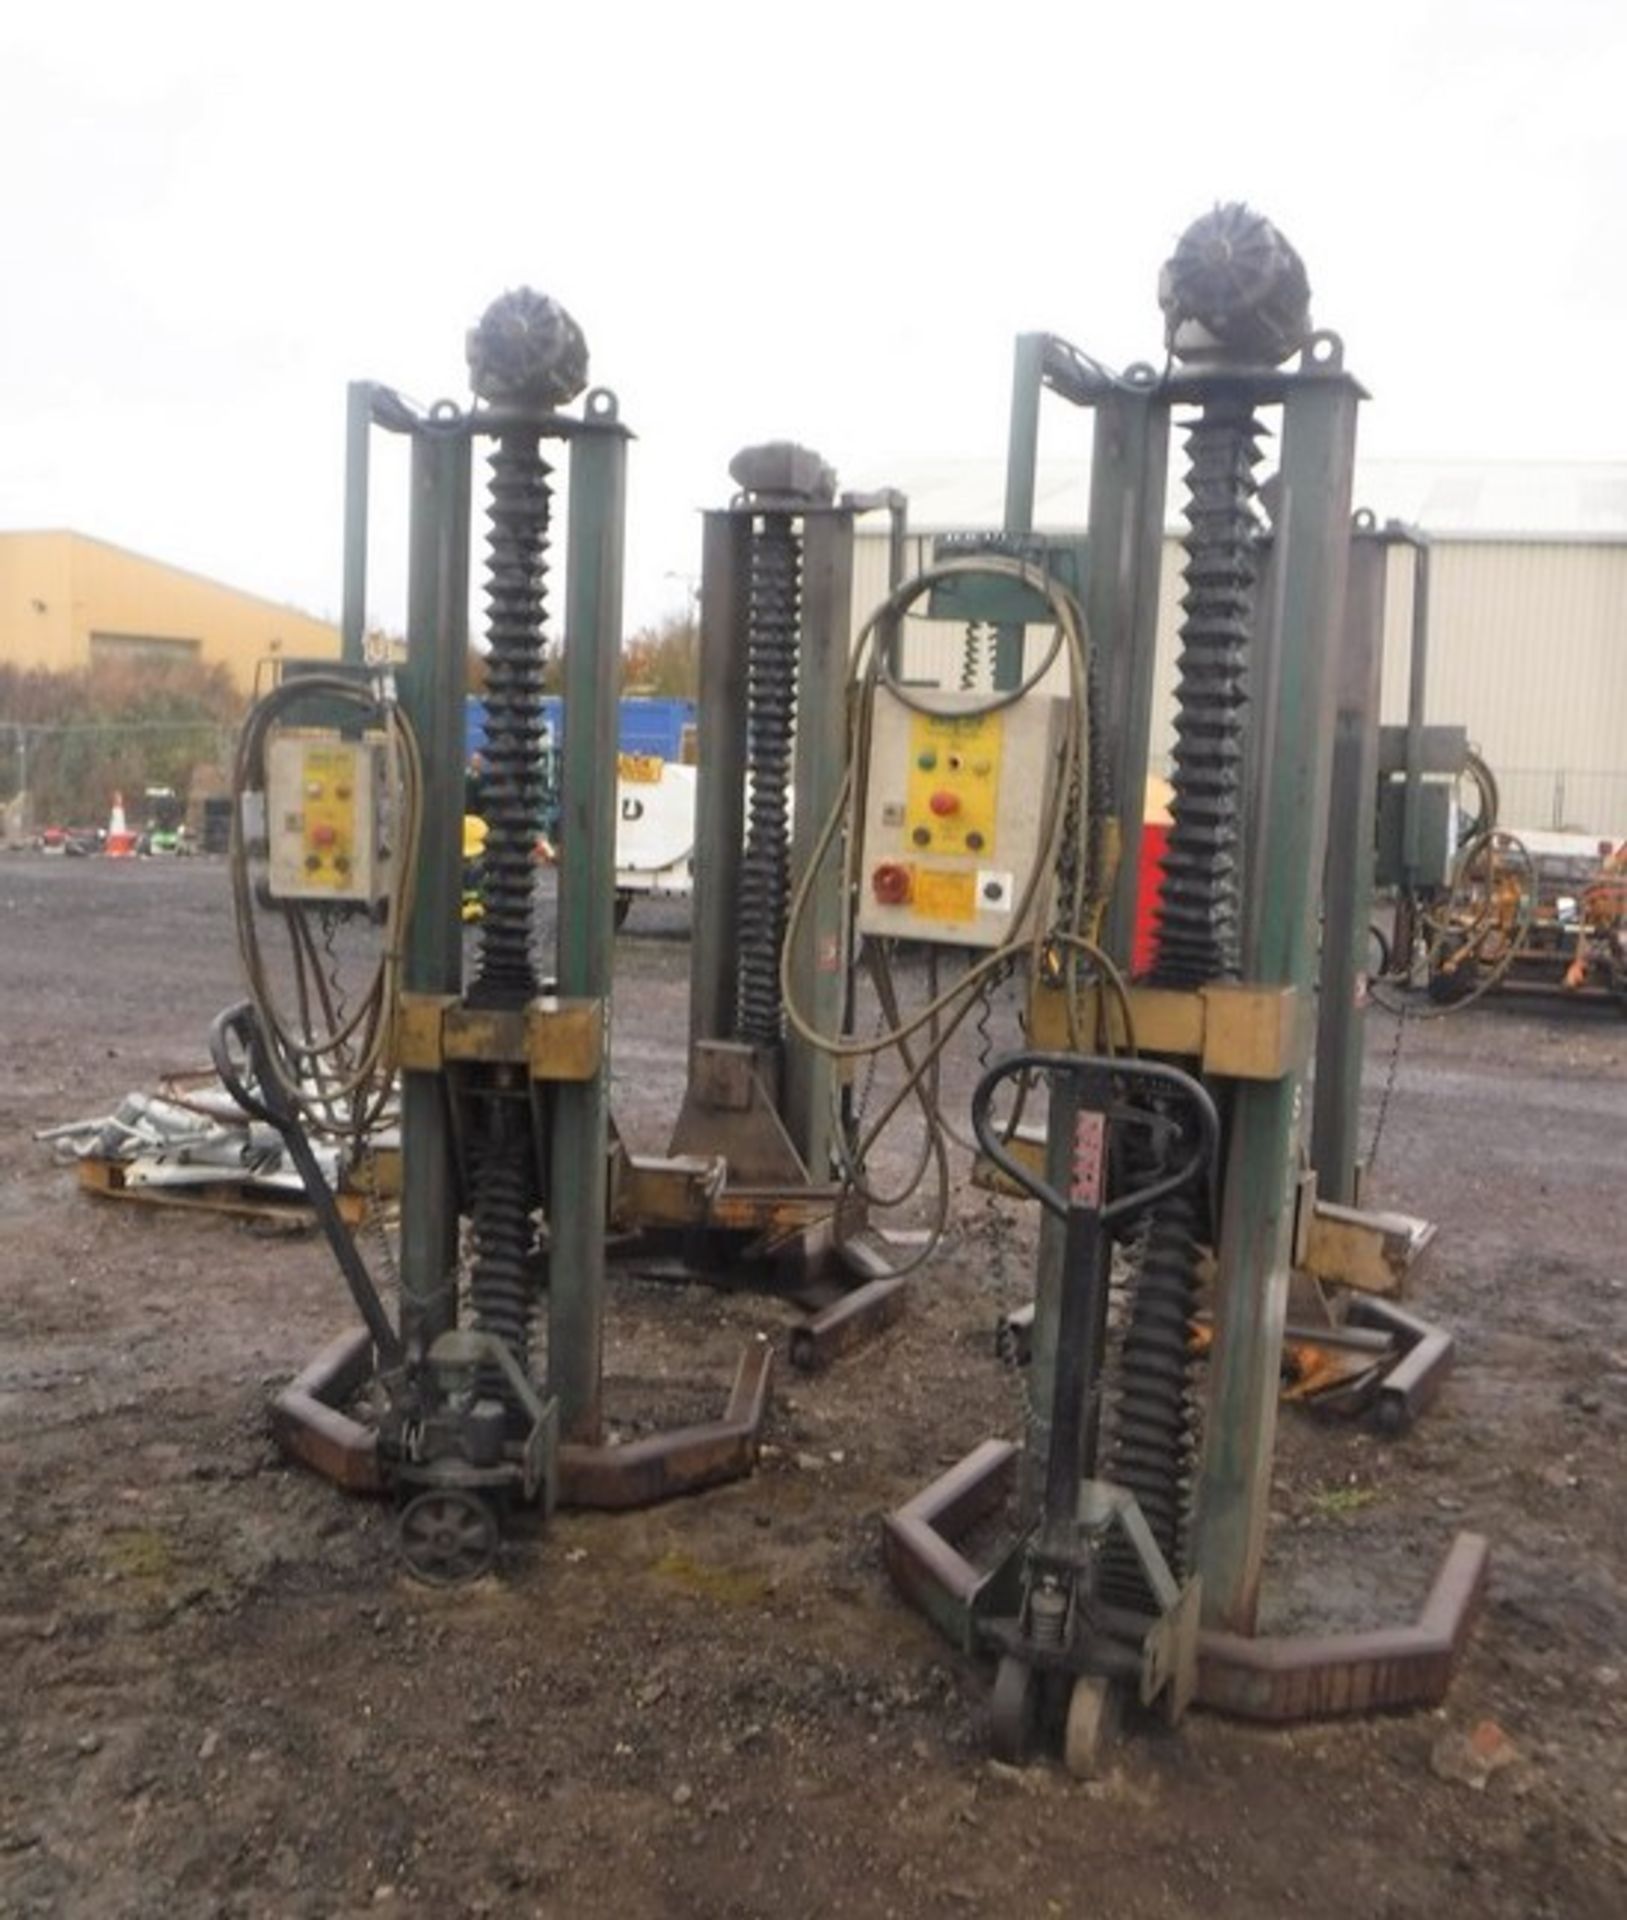 PROLIFT II 3 phase heavy good lifts. These lifts were used for the maintenance for single & double c - Bild 2 aus 5